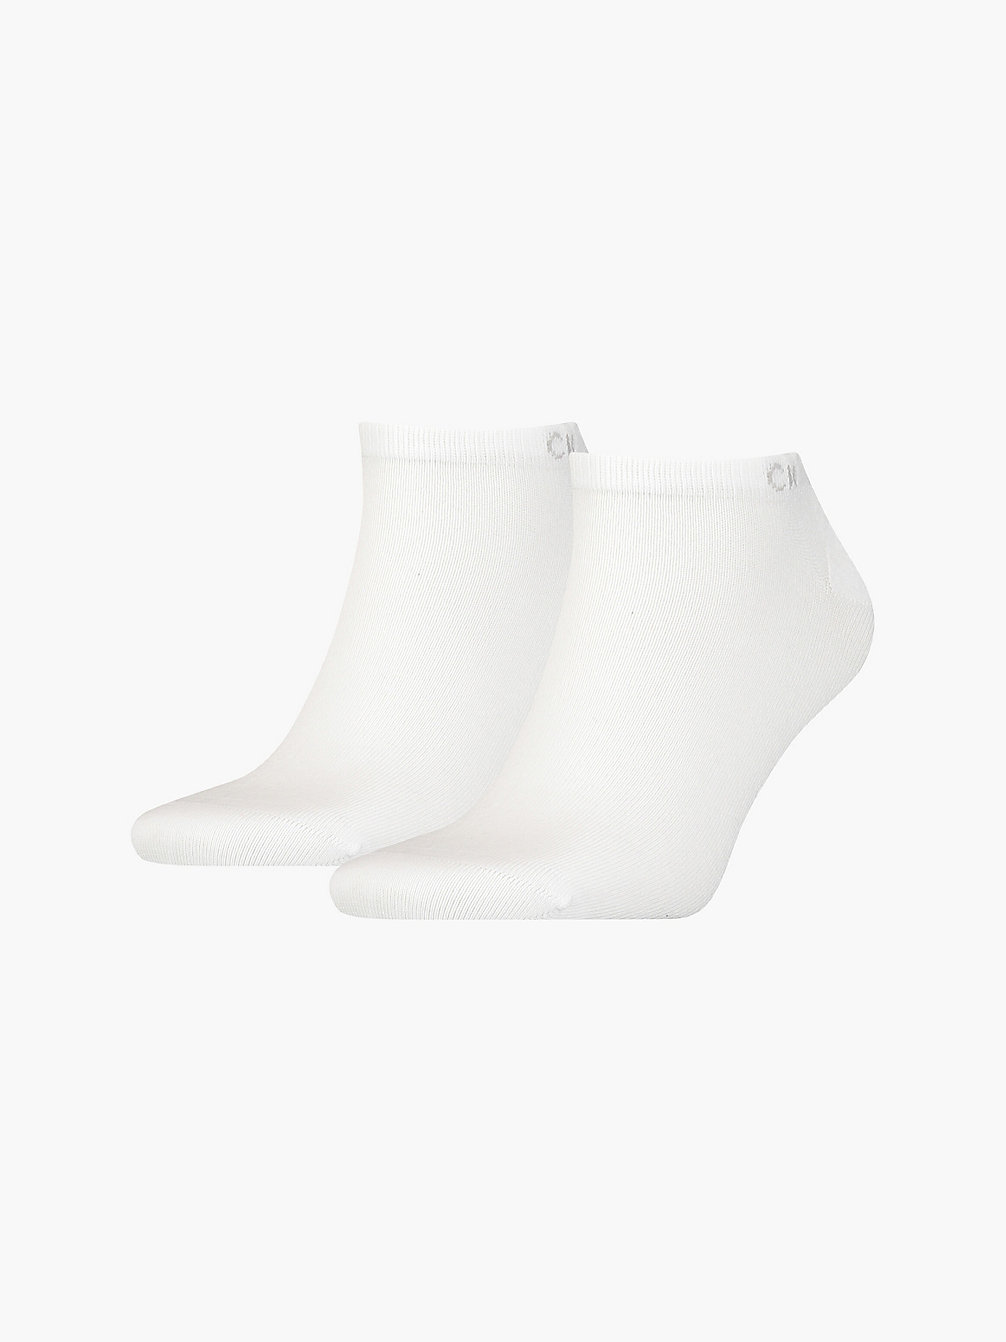 Pack De 2 Pares De Calcetines Invisibles > WHITE > undefined mujer > Calvin Klein